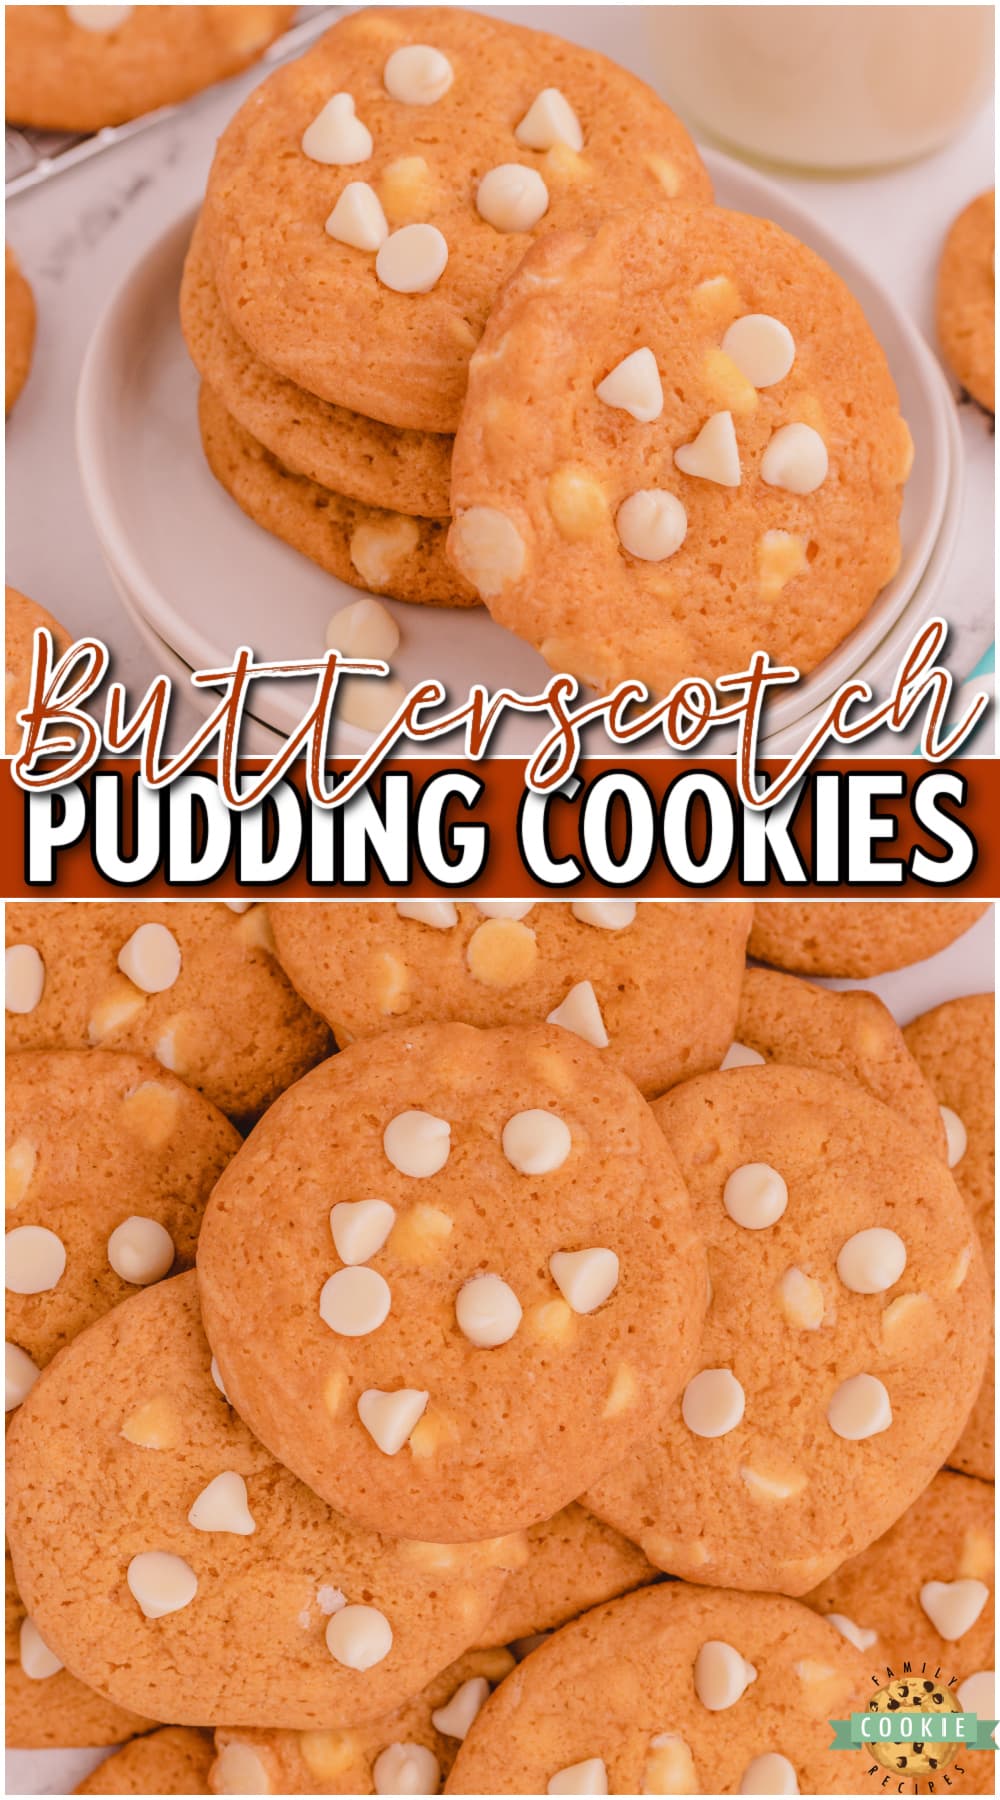 Butterscotch Pudding Cookies are a delightful cookie with great butterscotch flavor! This butterscotch cookie recipe is so simple to make & the pudding gives them the best texture & taste.